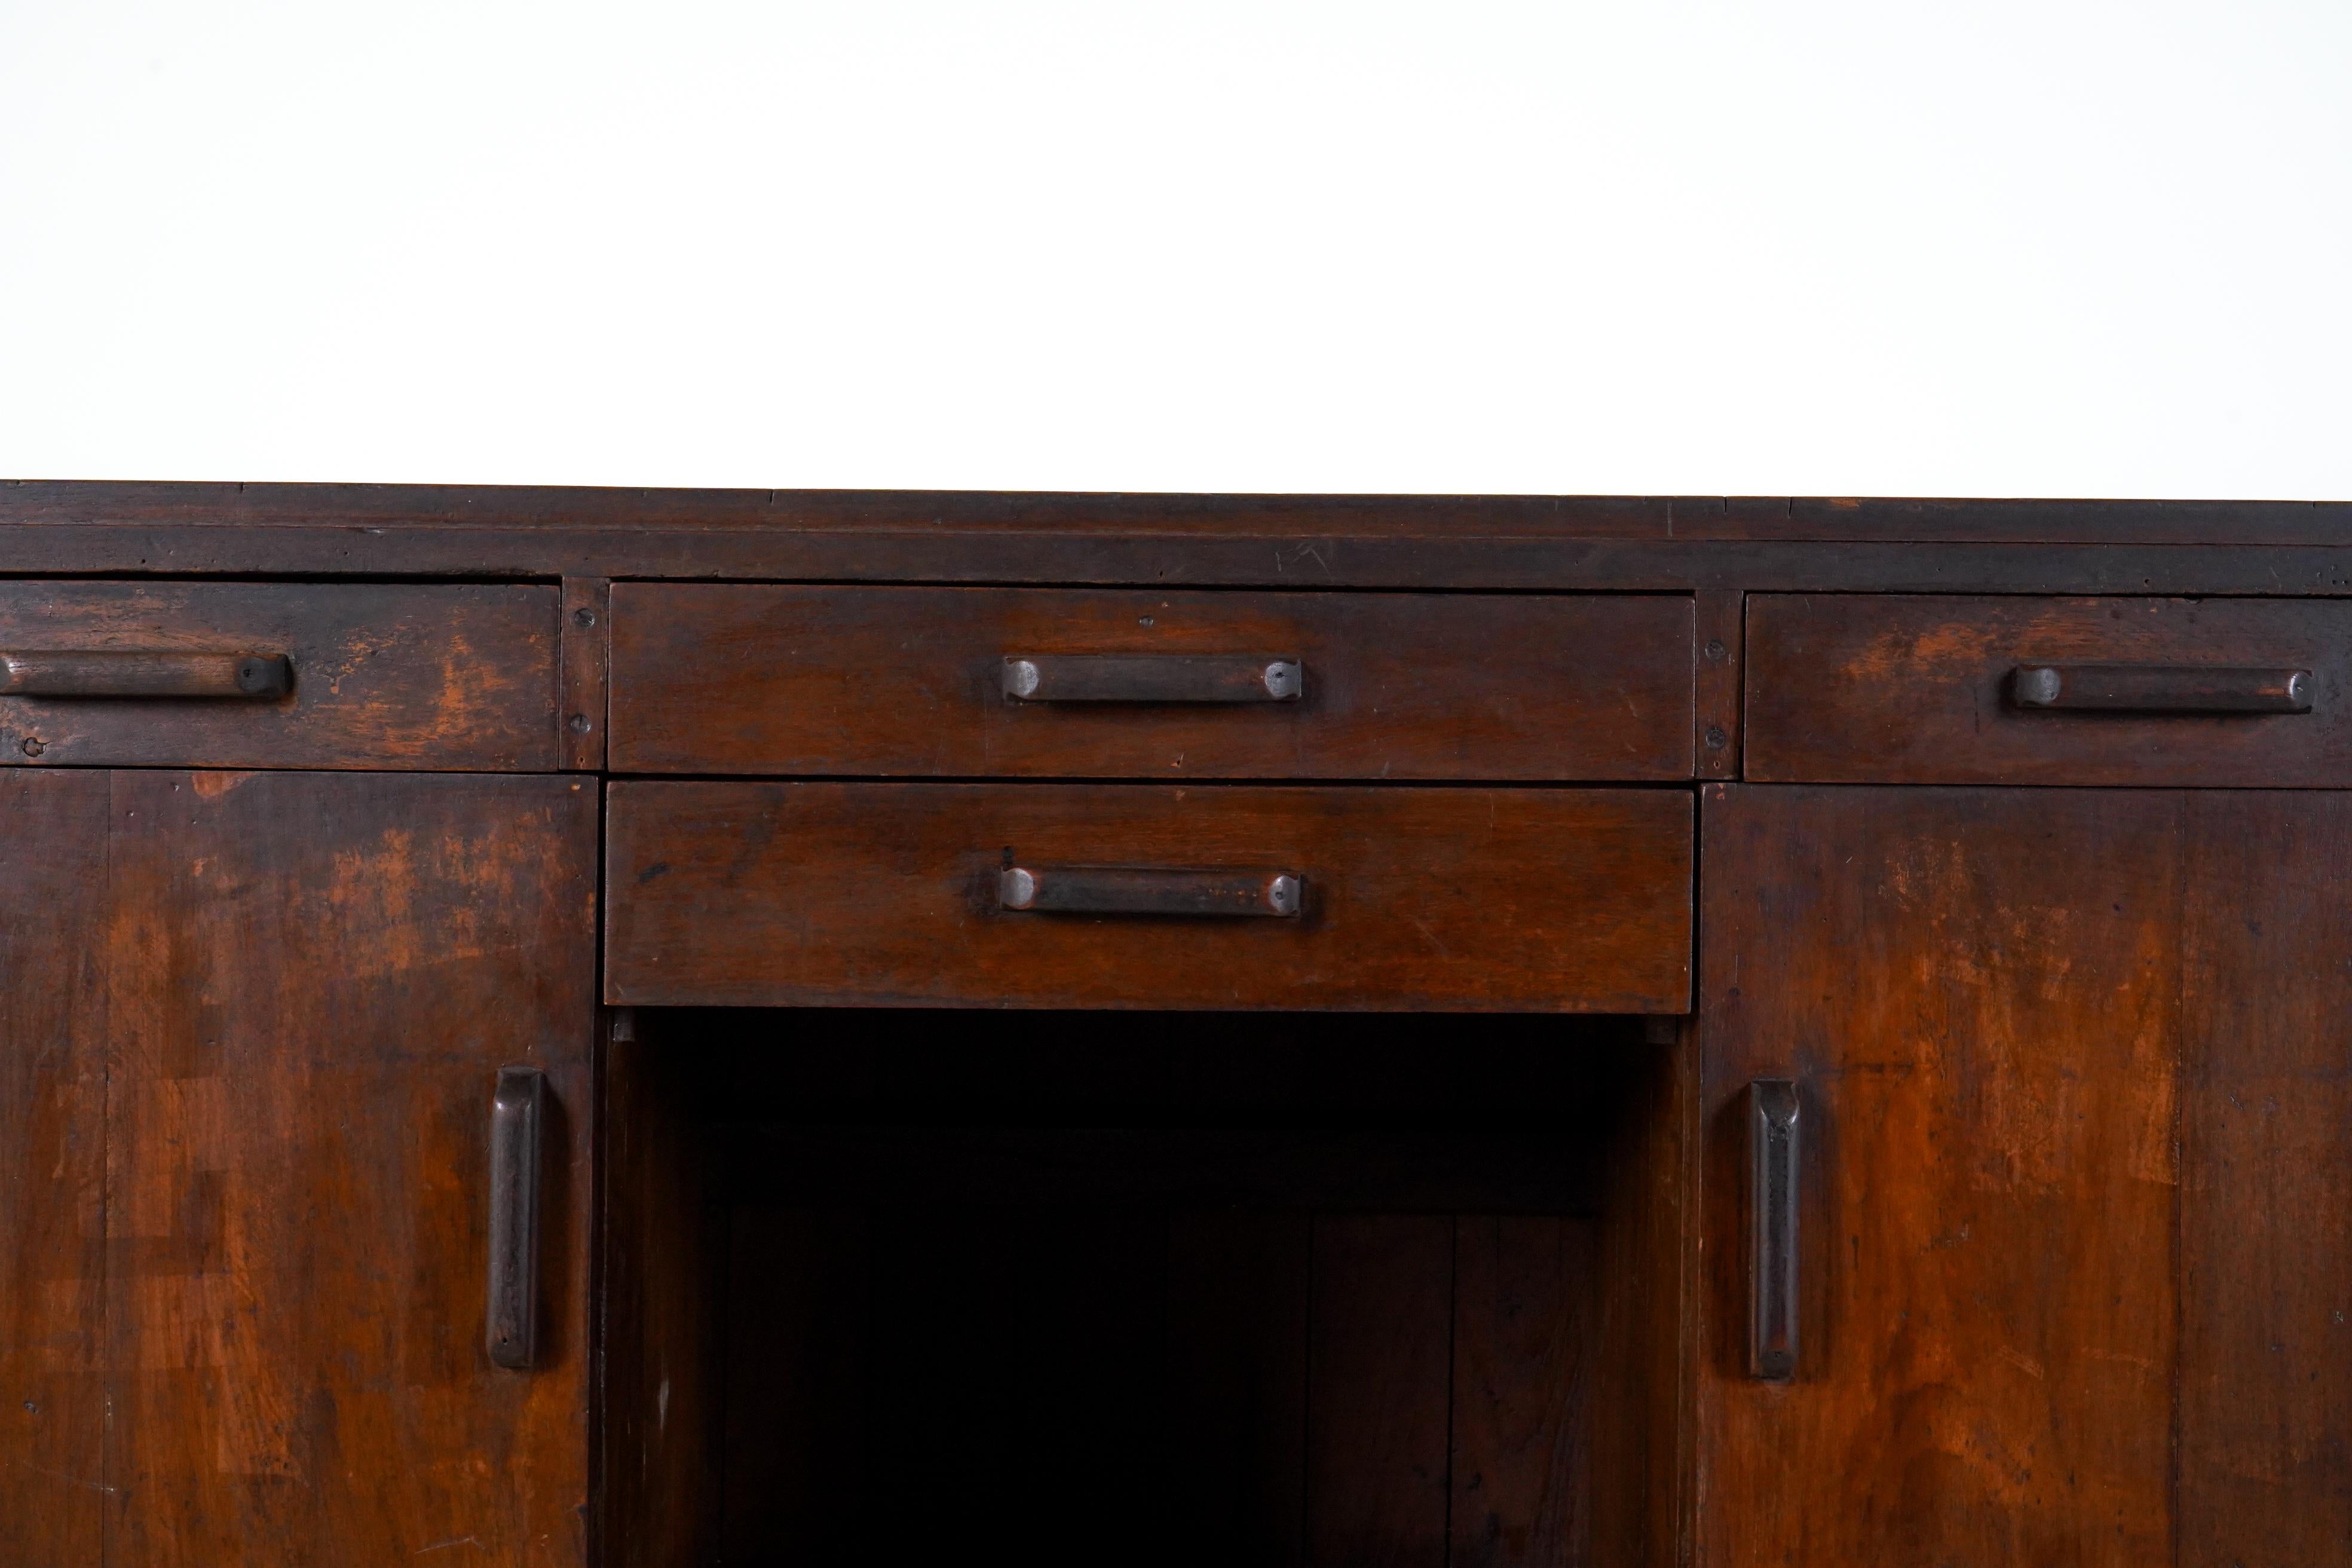 A British Colonial Teak Wood Shop Counter For Sale 2